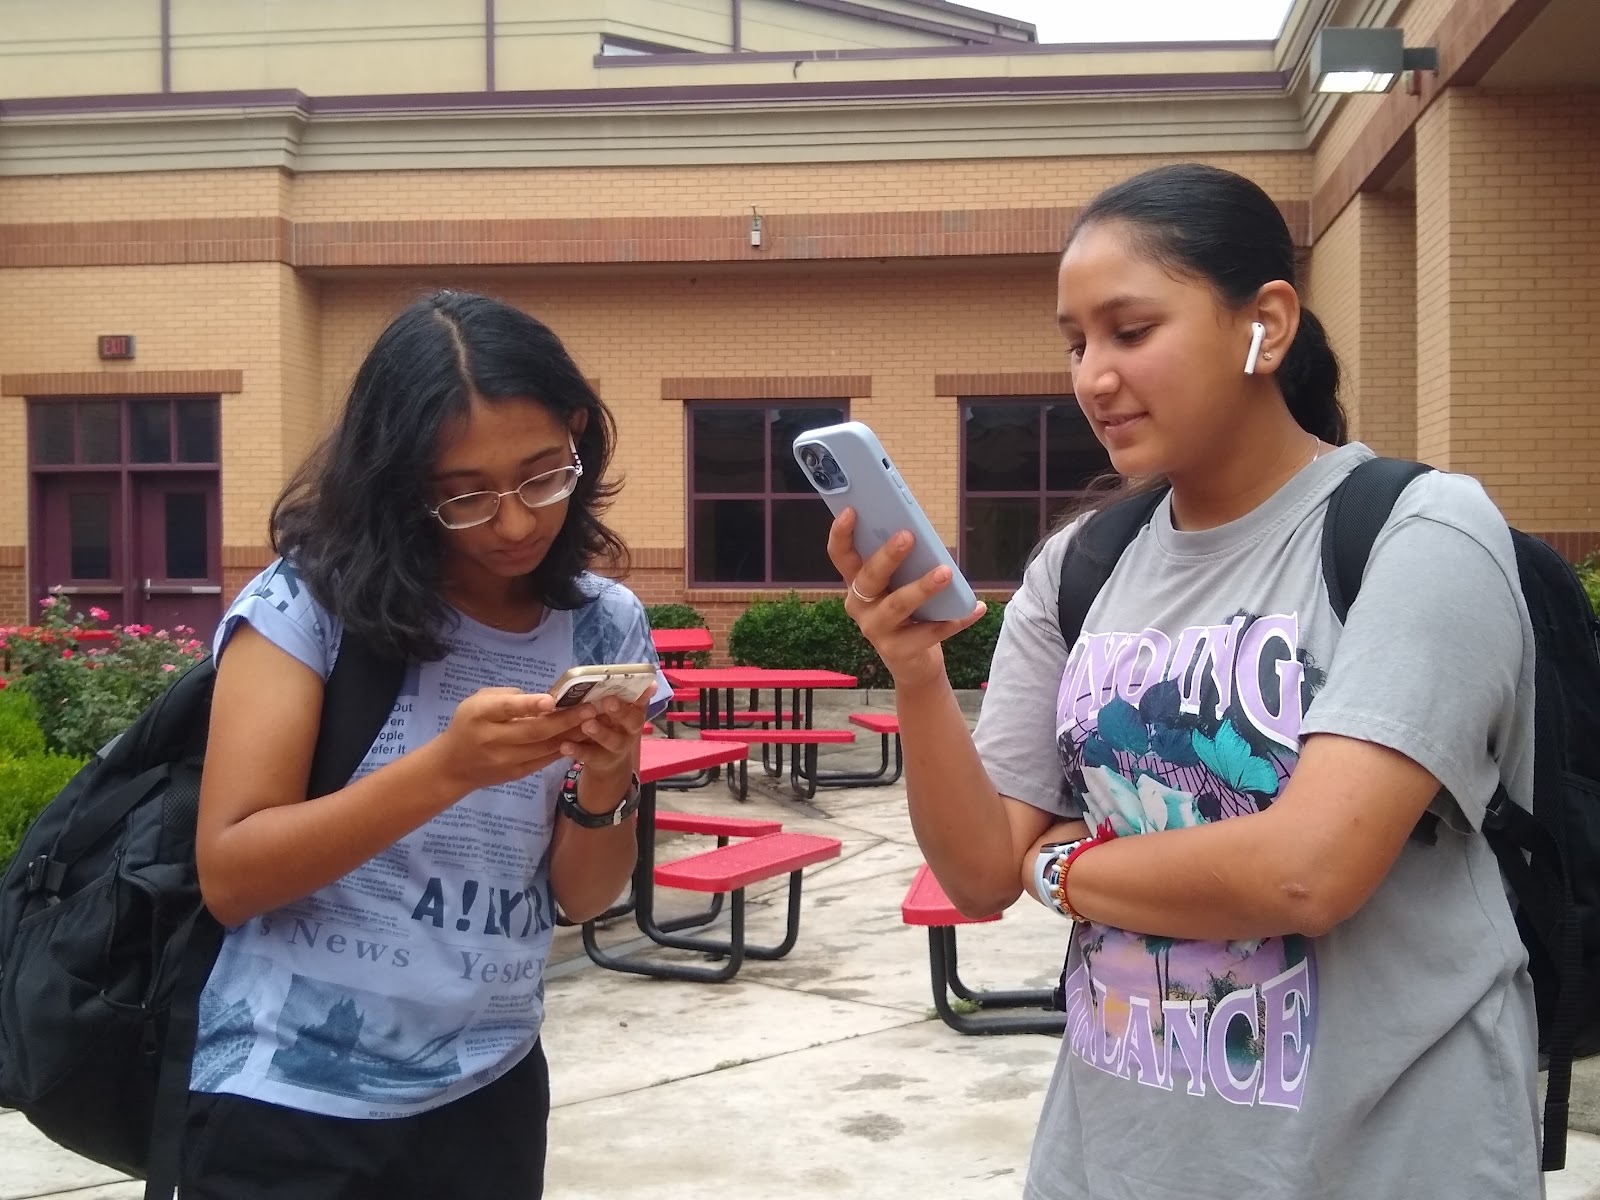 The image shows Freshman Naisha Sinha and Freshman Agamya Jain on their phones. Smartphones are a revolutionary piece of technology, but they can cause students to become distant. Eera Ingle/The Lambert Post